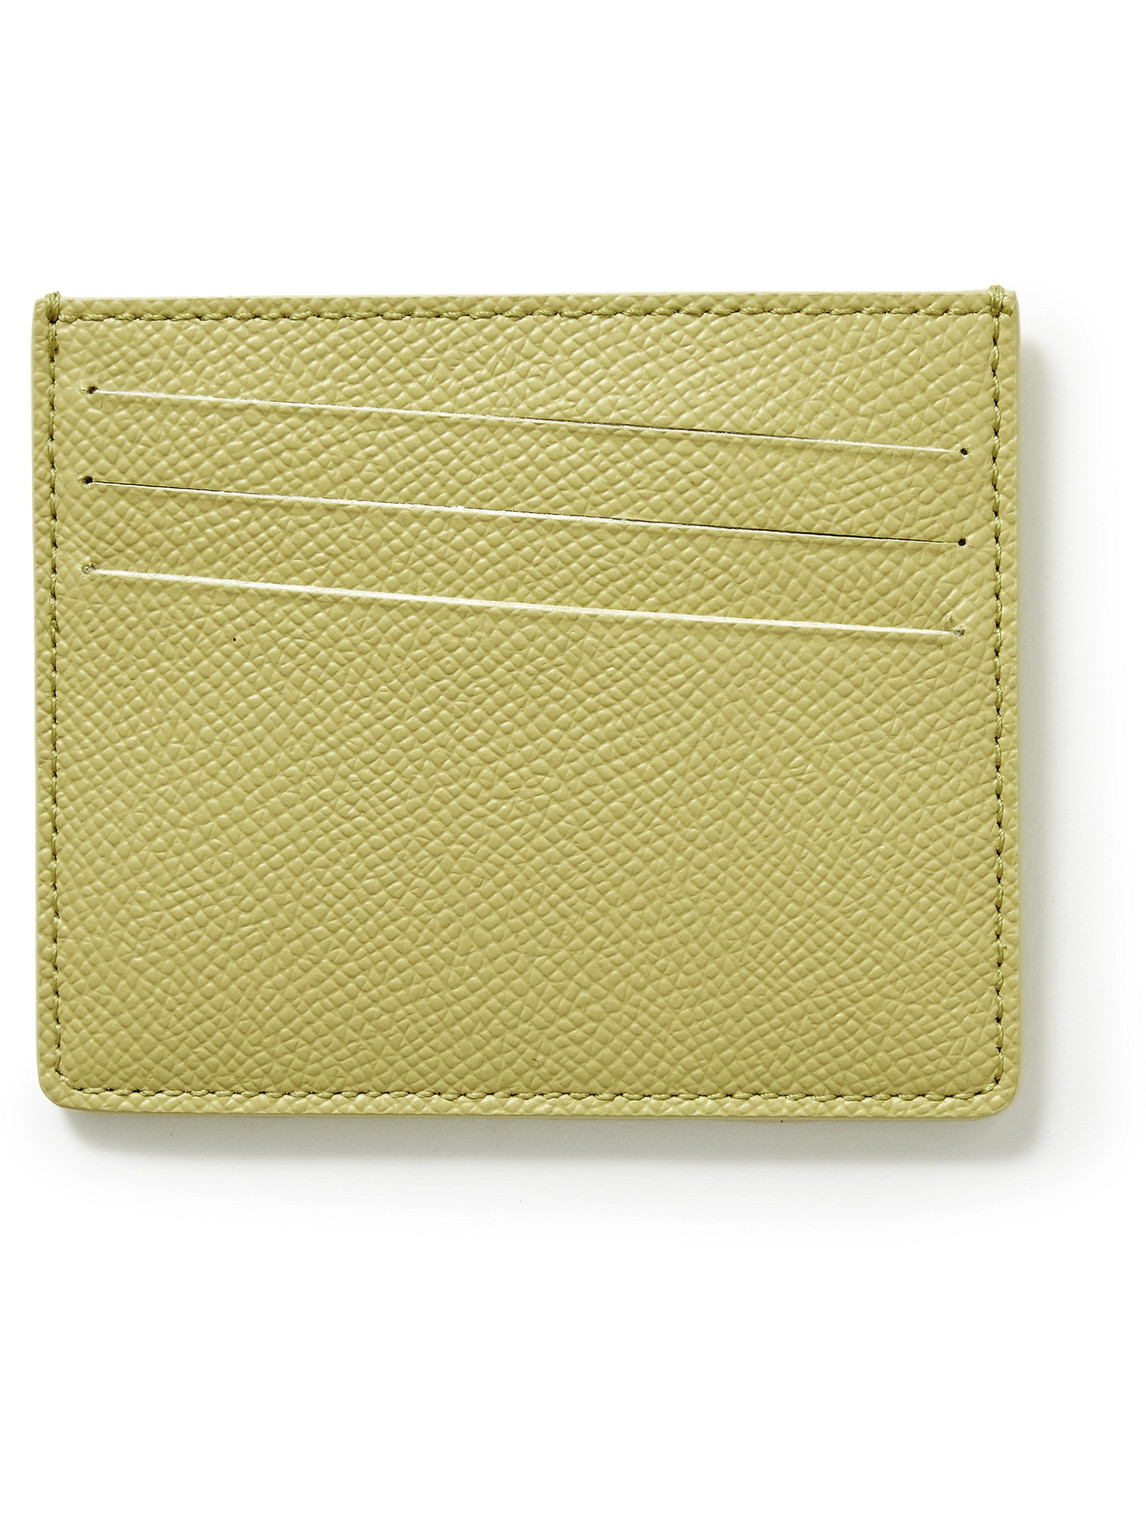 Maison Margiela Lime Leather Cardholder In Yellow